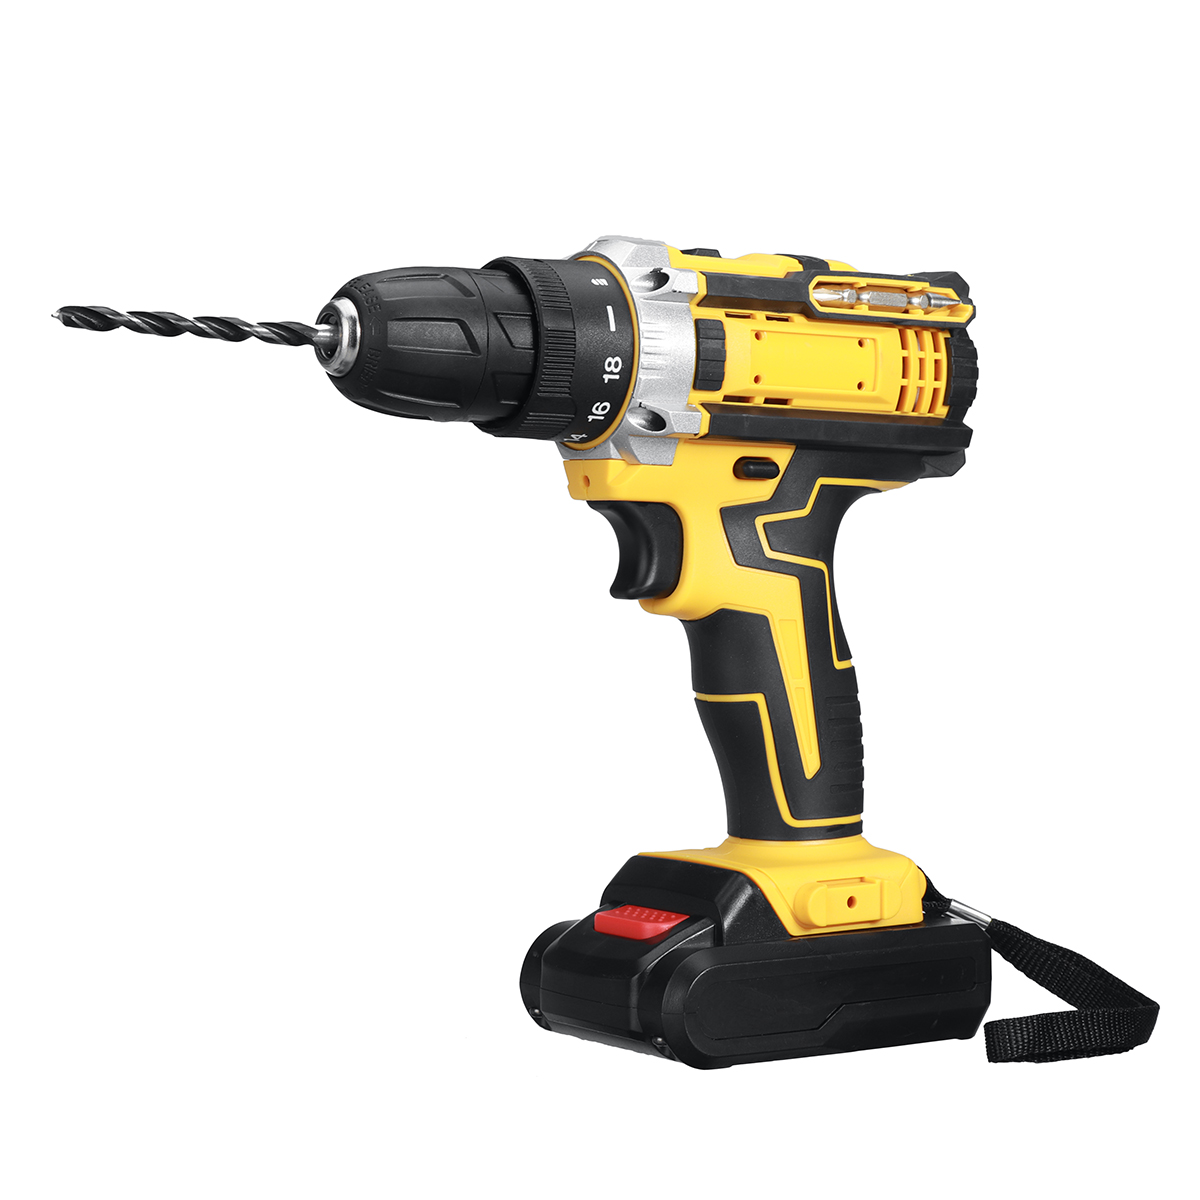 21V-Wireless-Rechargeable-Impact-Hammer-Drill-Electric-Screwdriver-W-Battery--Storage-Case-Screwing--1858203-26